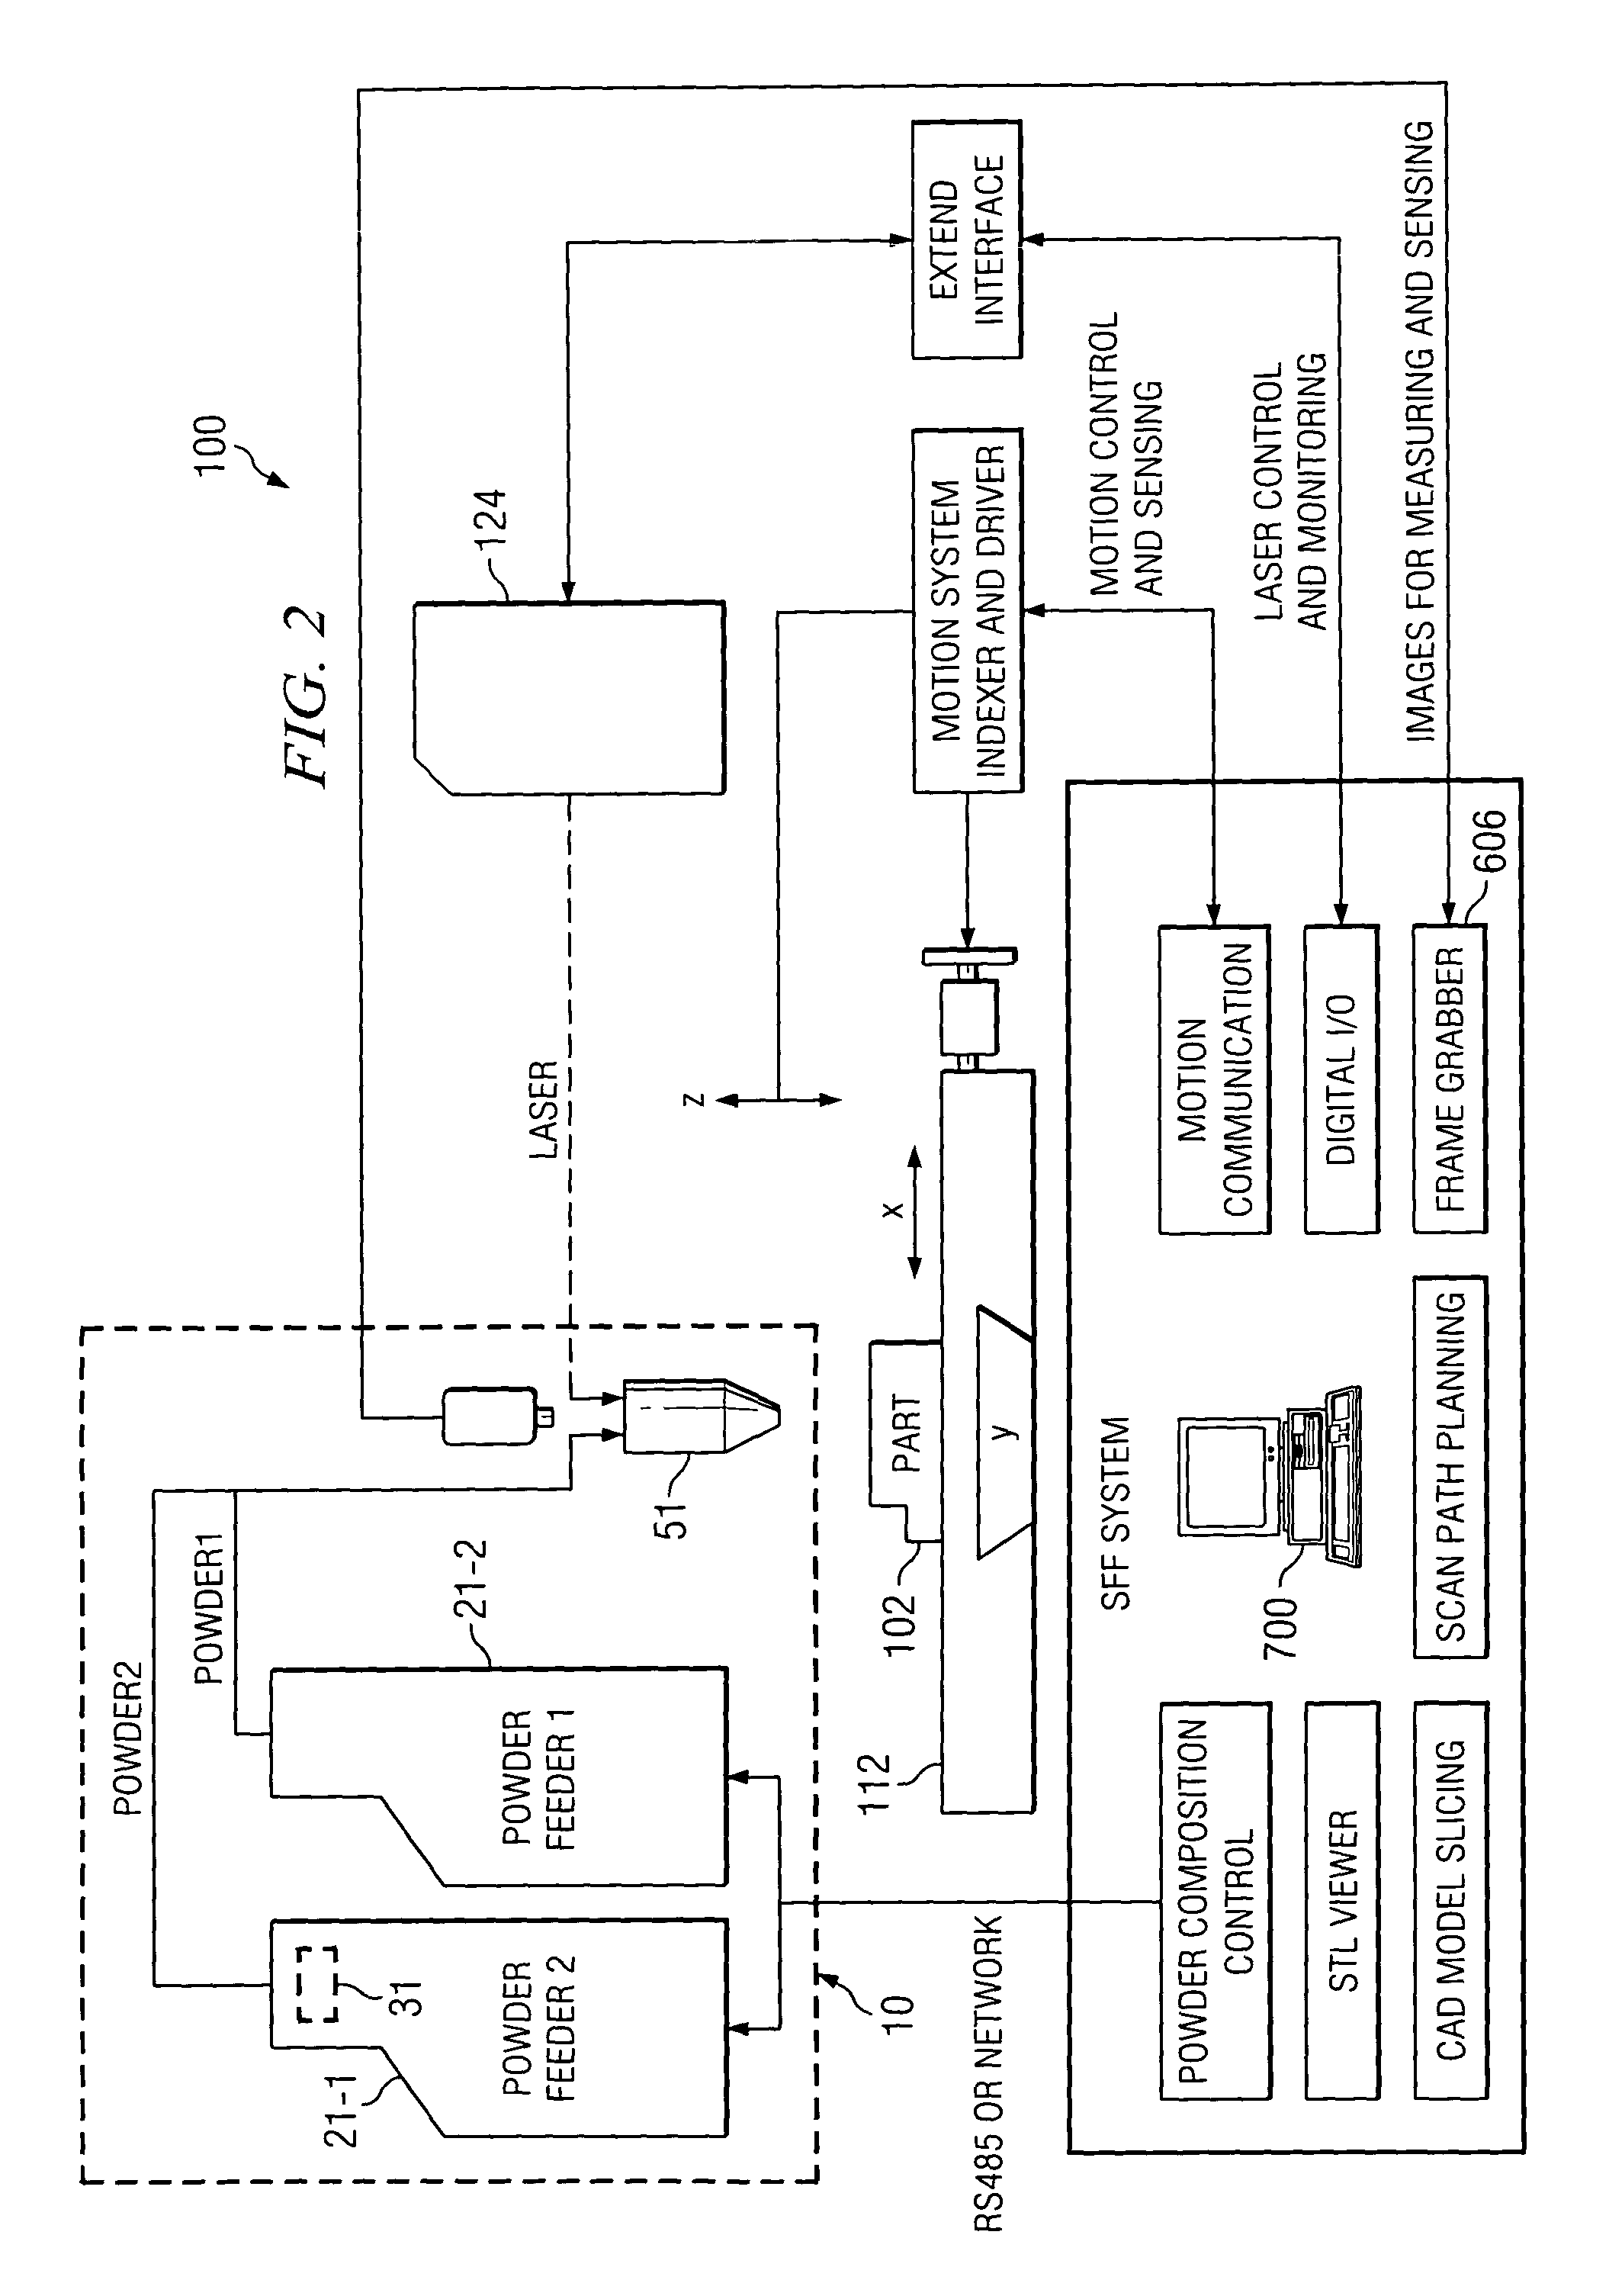 System and method for controlling the size of the molten pool in laser-based additive manufacturing